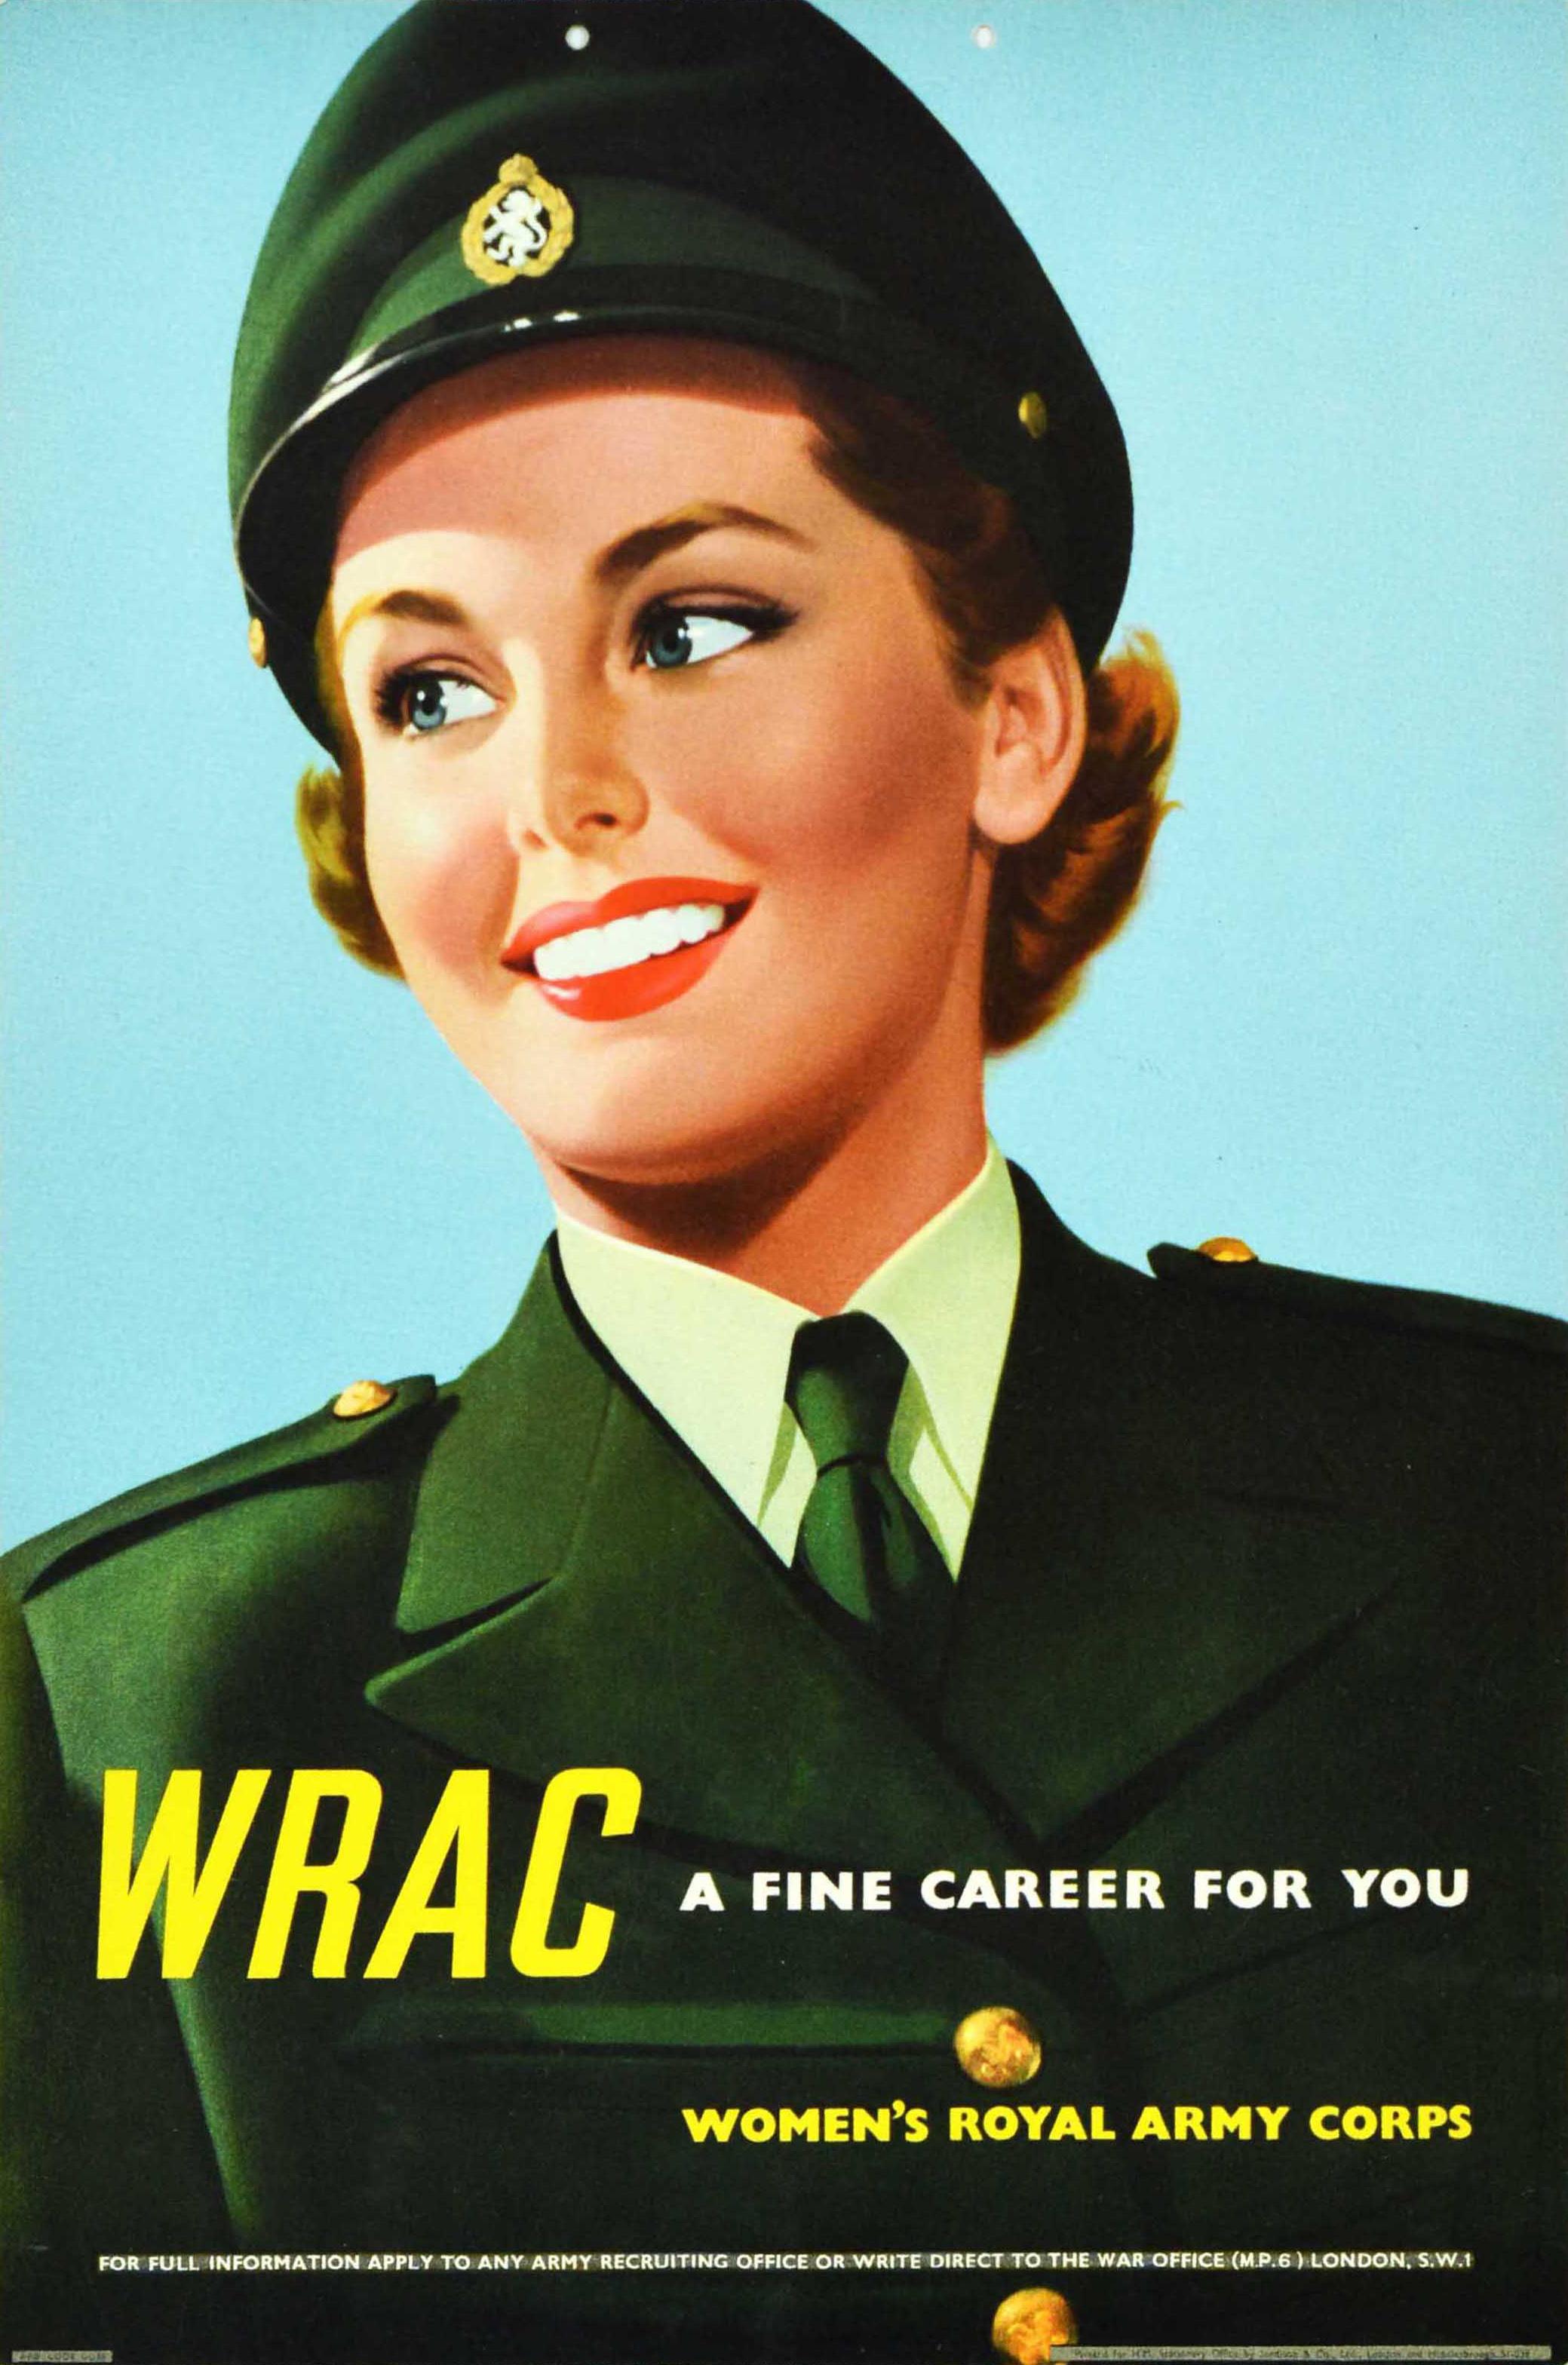 Unknown Print - Original Vintage Military Poster WRAC A Fine Career Women's Royal Army Corps UK